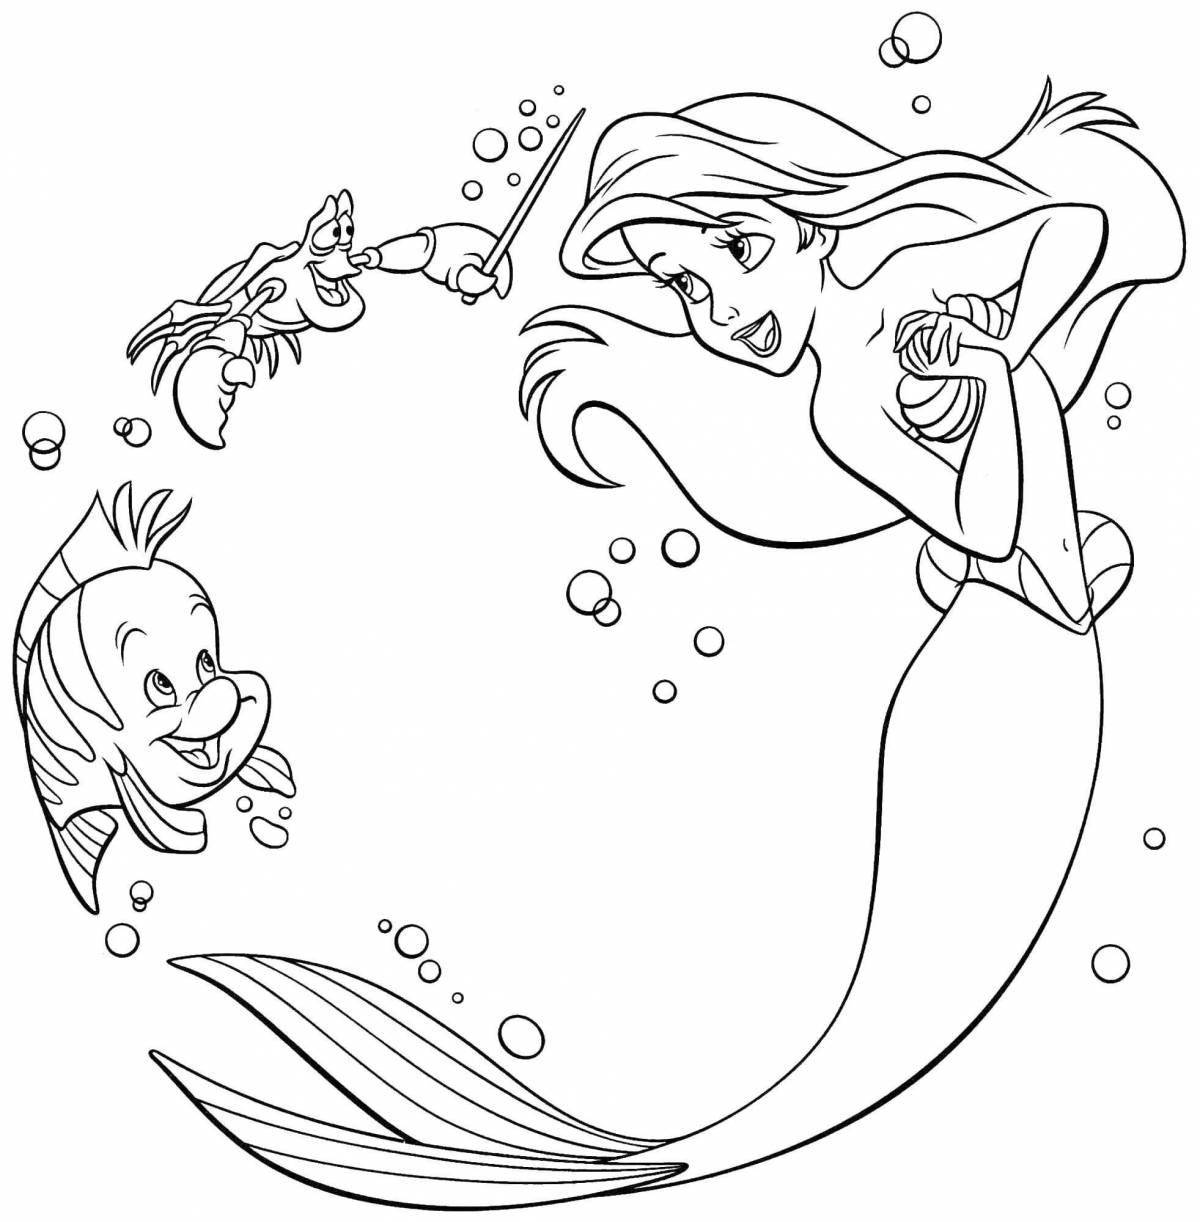 Delightful mermaid coloring book for kids 4-5 years old